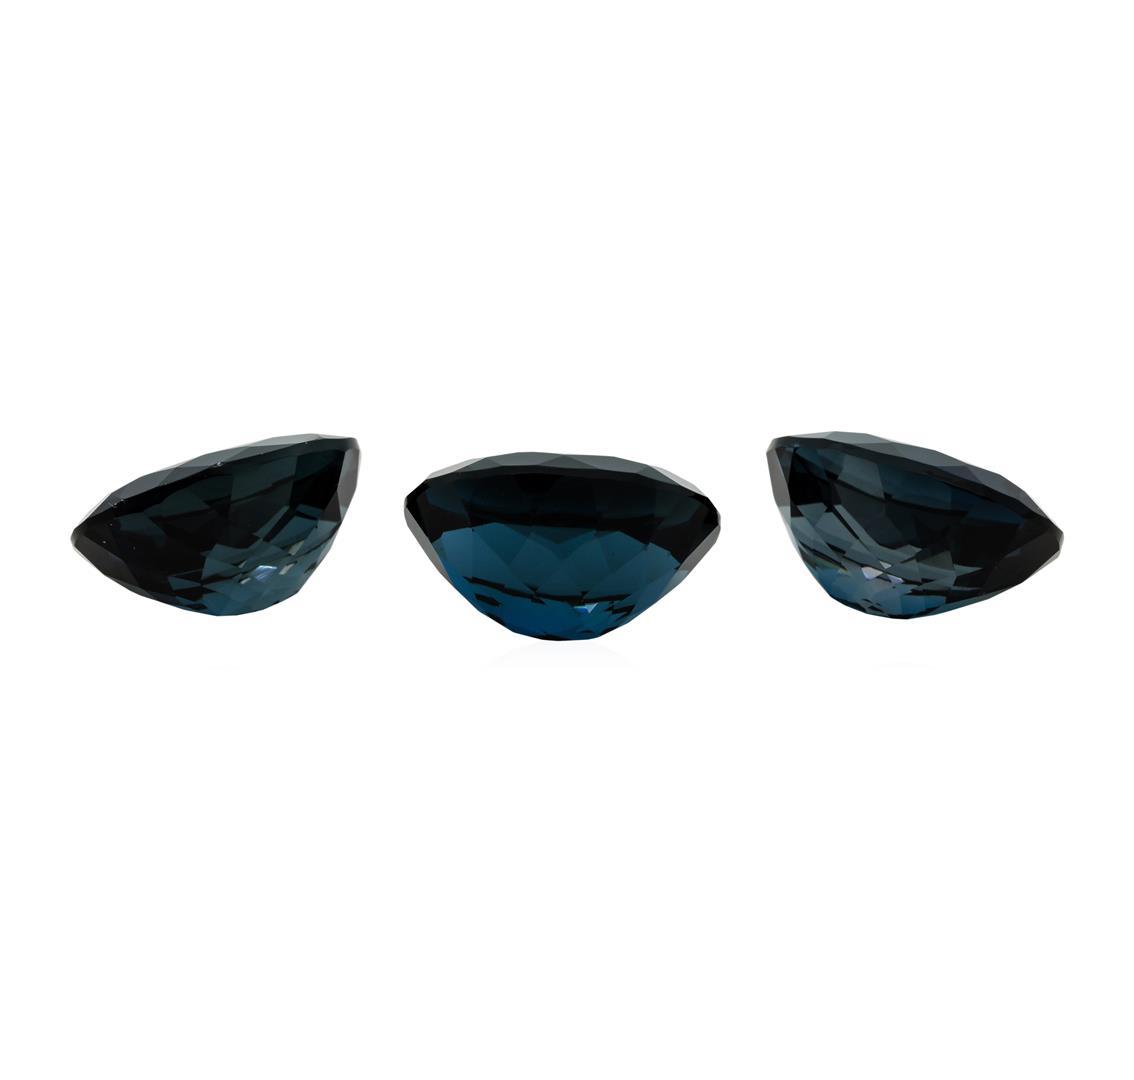 70.44 ctw. Natural Oval Cut London Blue Topaz Parcel of Three